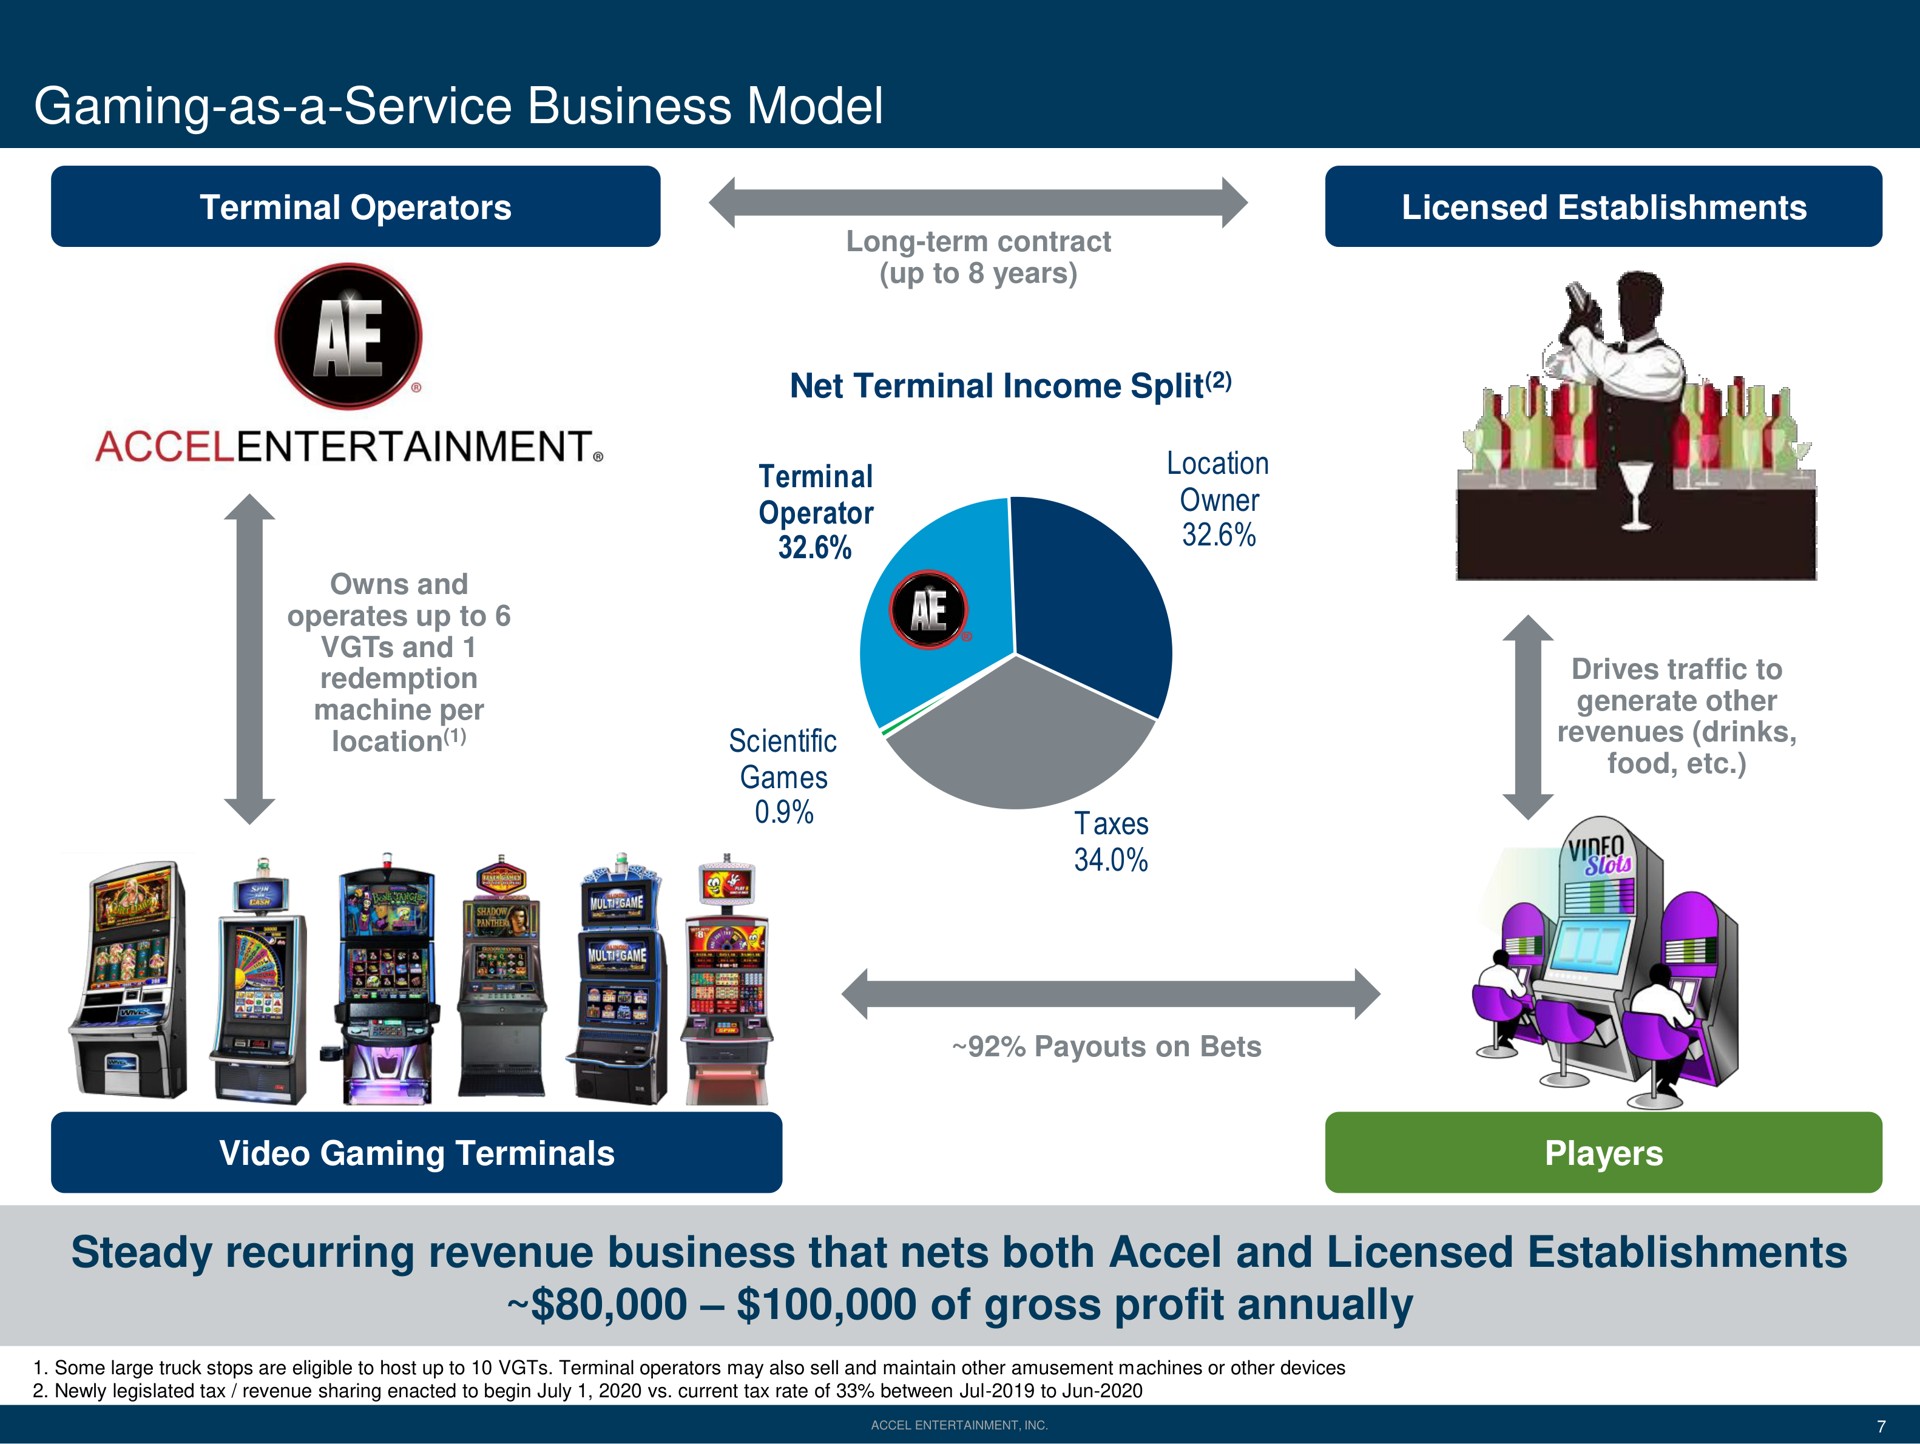 gaming as a service business model steady recurring revenue business that nets both and licensed establishments of gross profit annually terminal operators | Accel Entertaiment